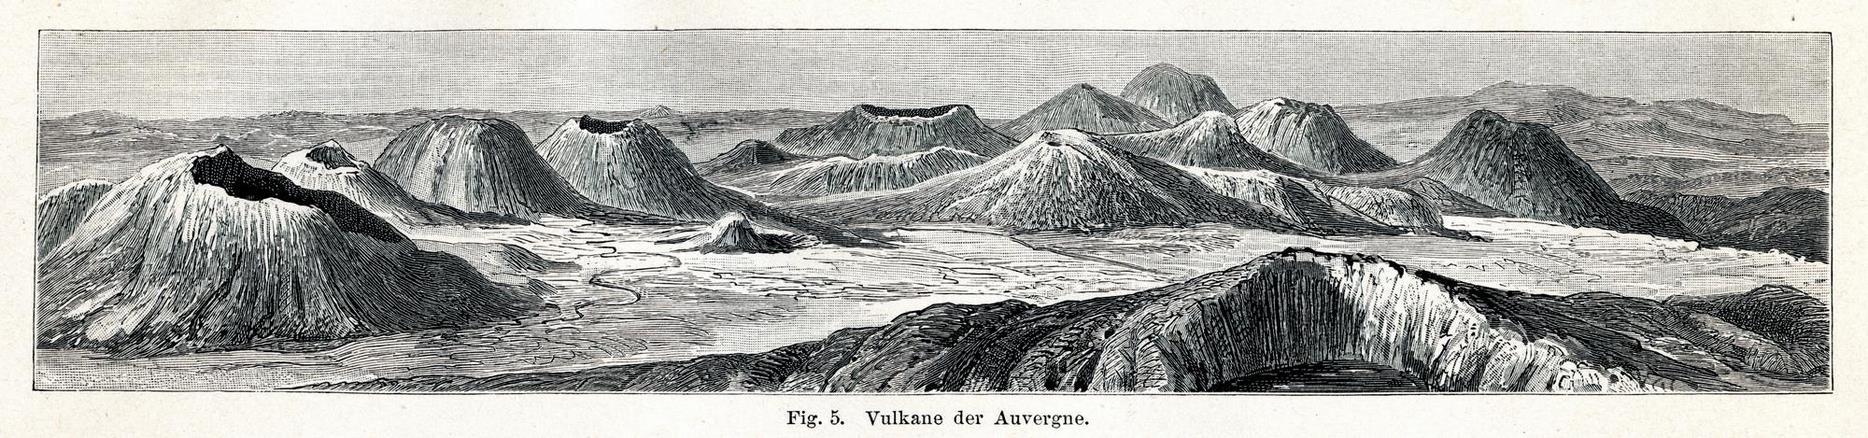 Drawing of the Chaines des Puys in the Puy de Dôme